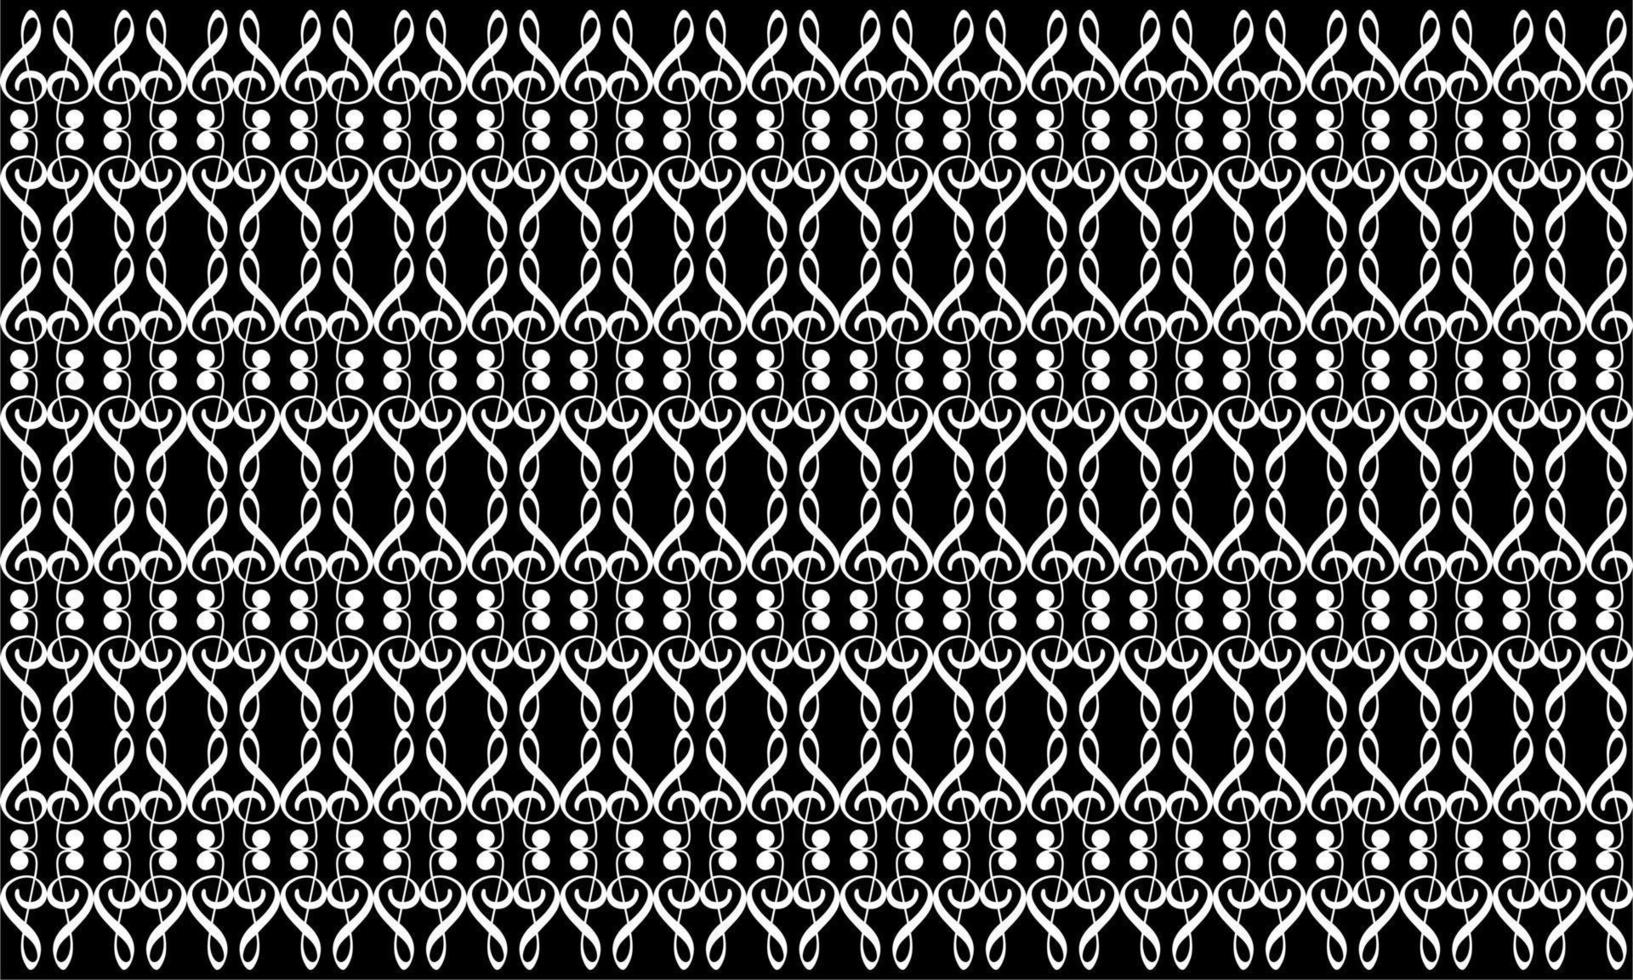 Motifs Pattern Inspired by Musical Note Icon Symbol for Decoration, Ornate, Background or Graphic Design Element. Vector Illustration